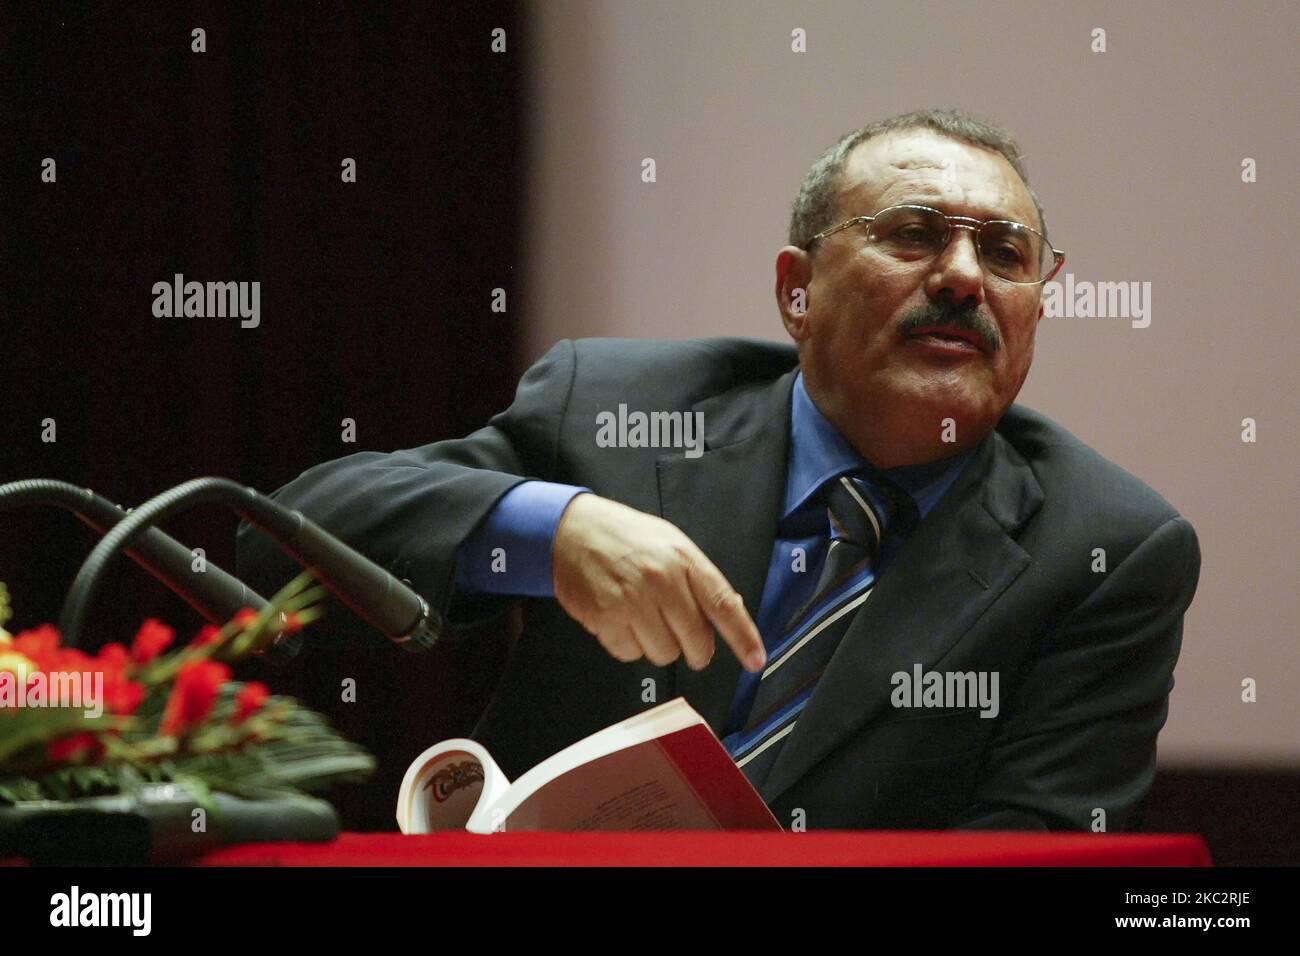 Former Yemen President Ali Abdullah Saleh held on special lecture at Seoul National University in Seoul, South Korea on April 26, 2005. Lecture about The realization process of Yemeni unification. (Photo by Seung-il Ryu/NurPhoto) Stock Photo